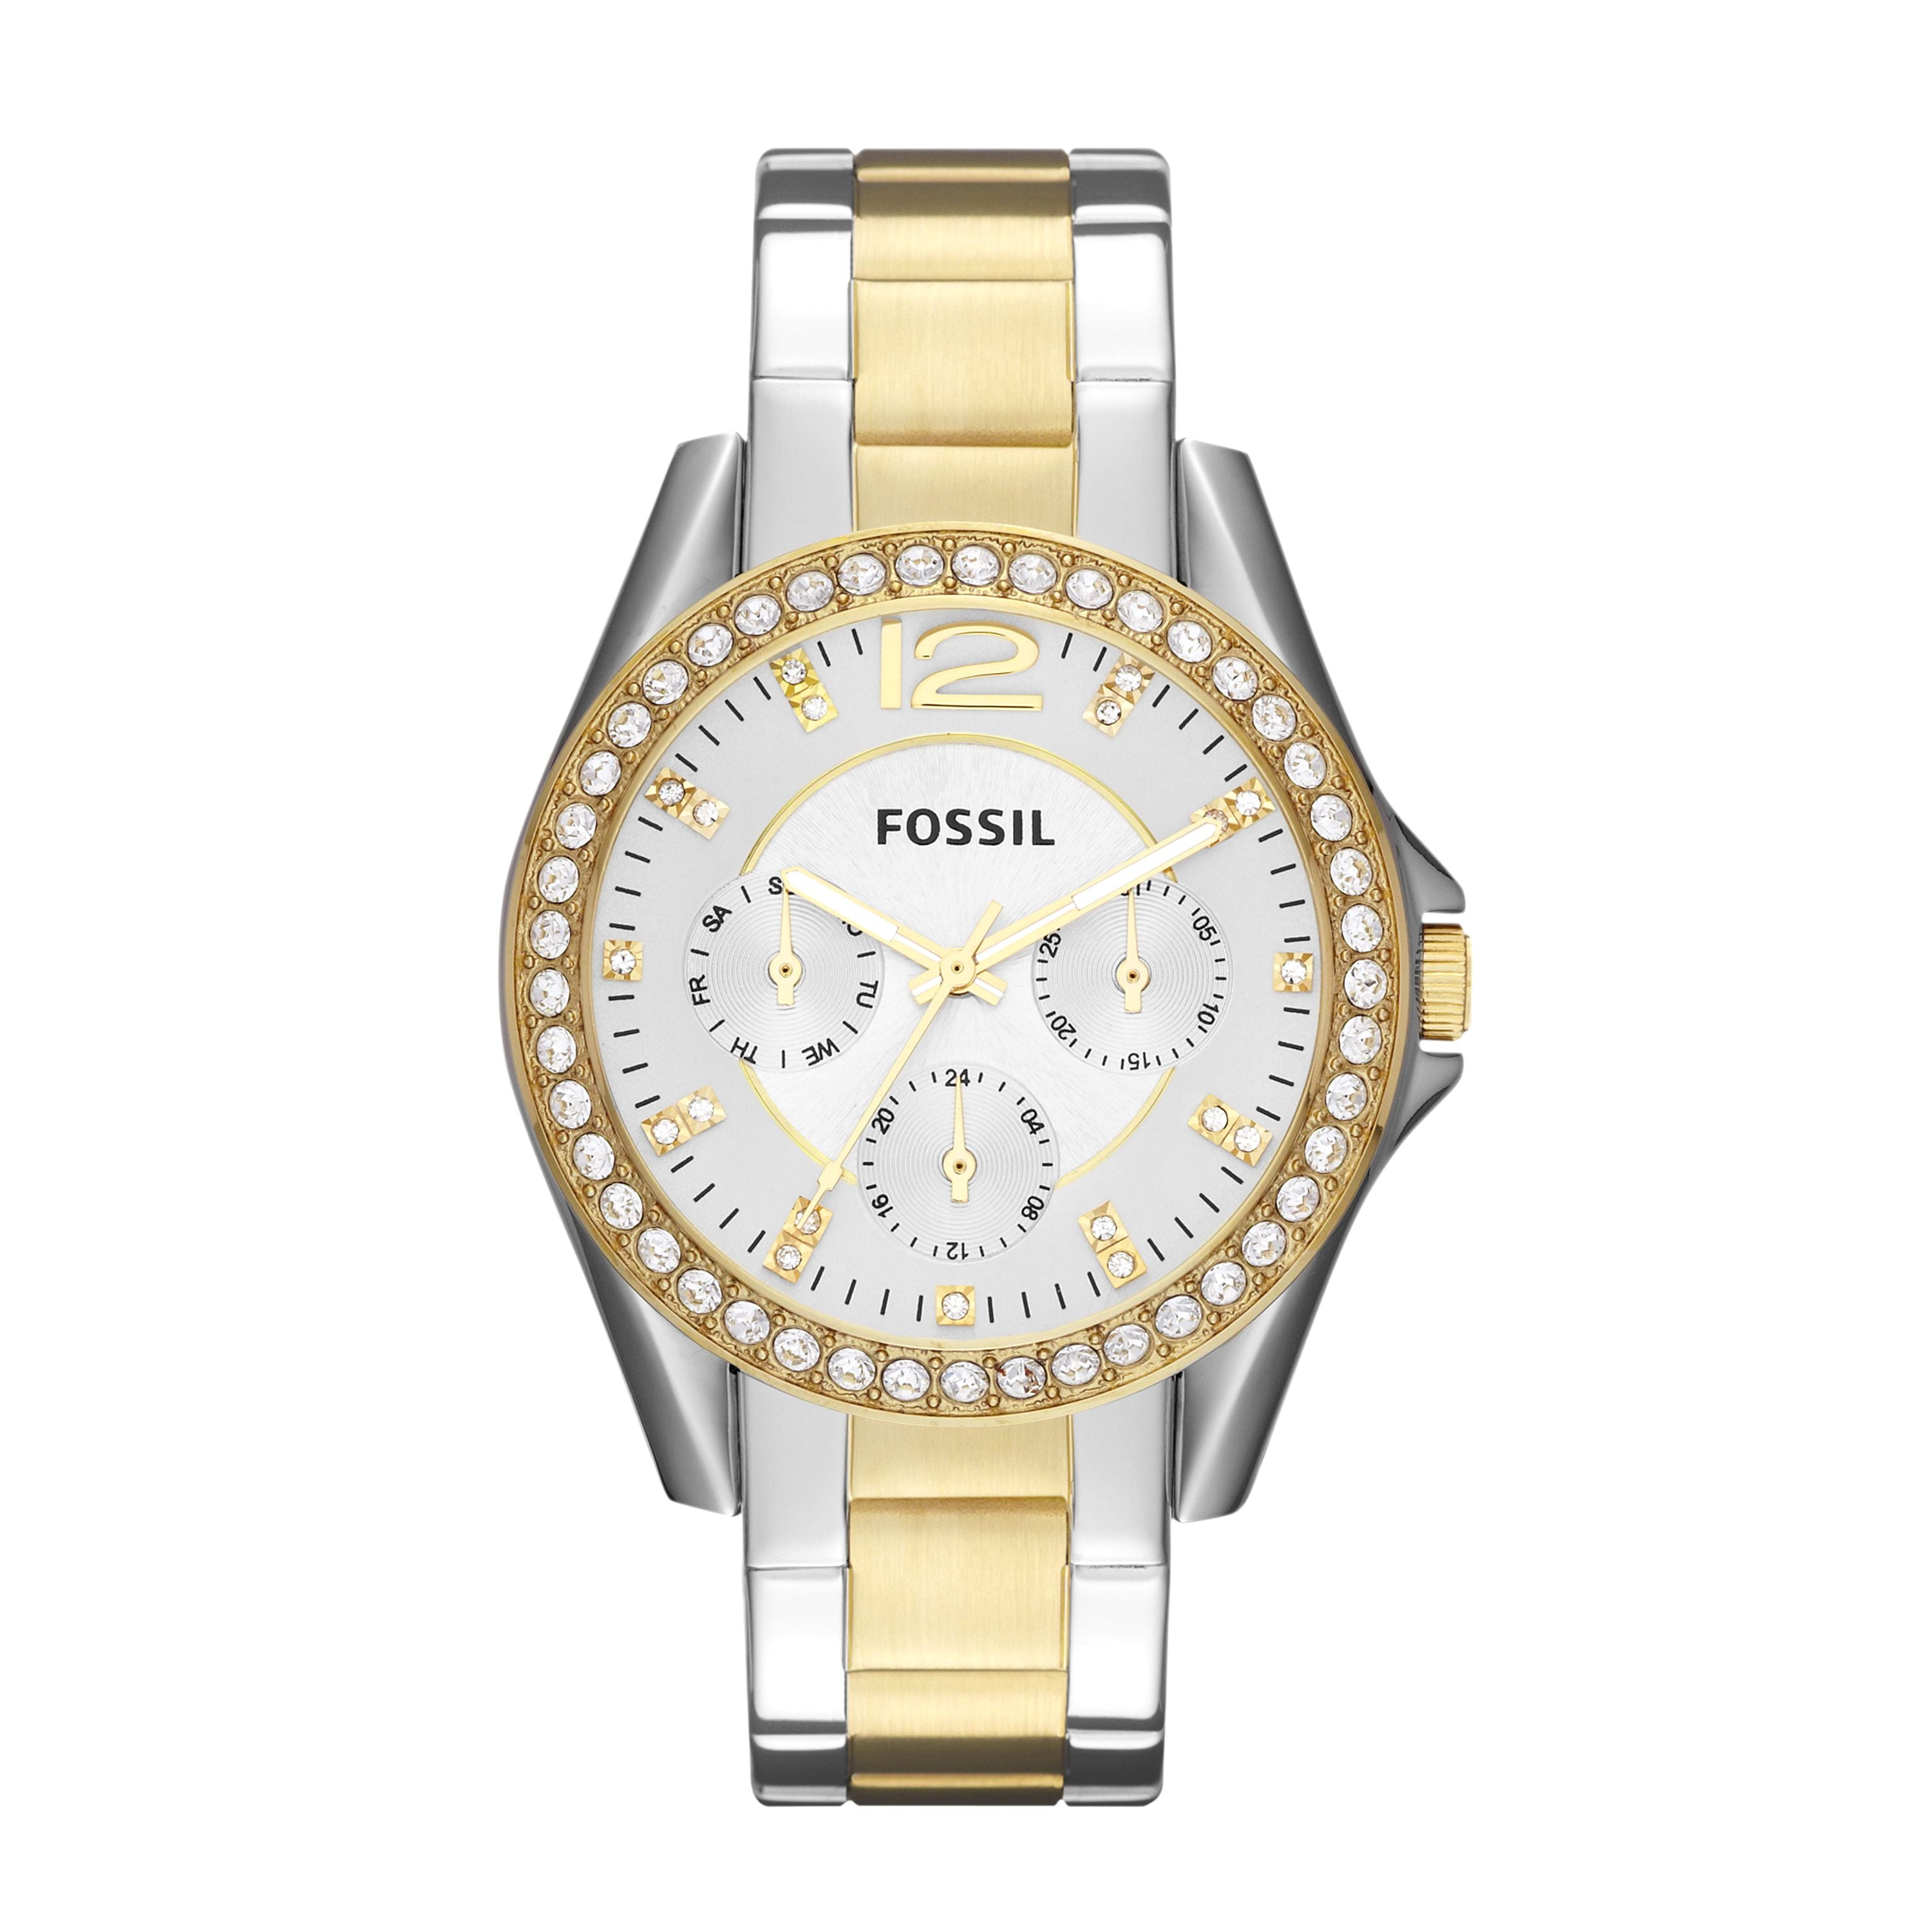 Fossil Women's Multifunction, Rose Gold-Tone Stainless Steel Watch, ES2811 -